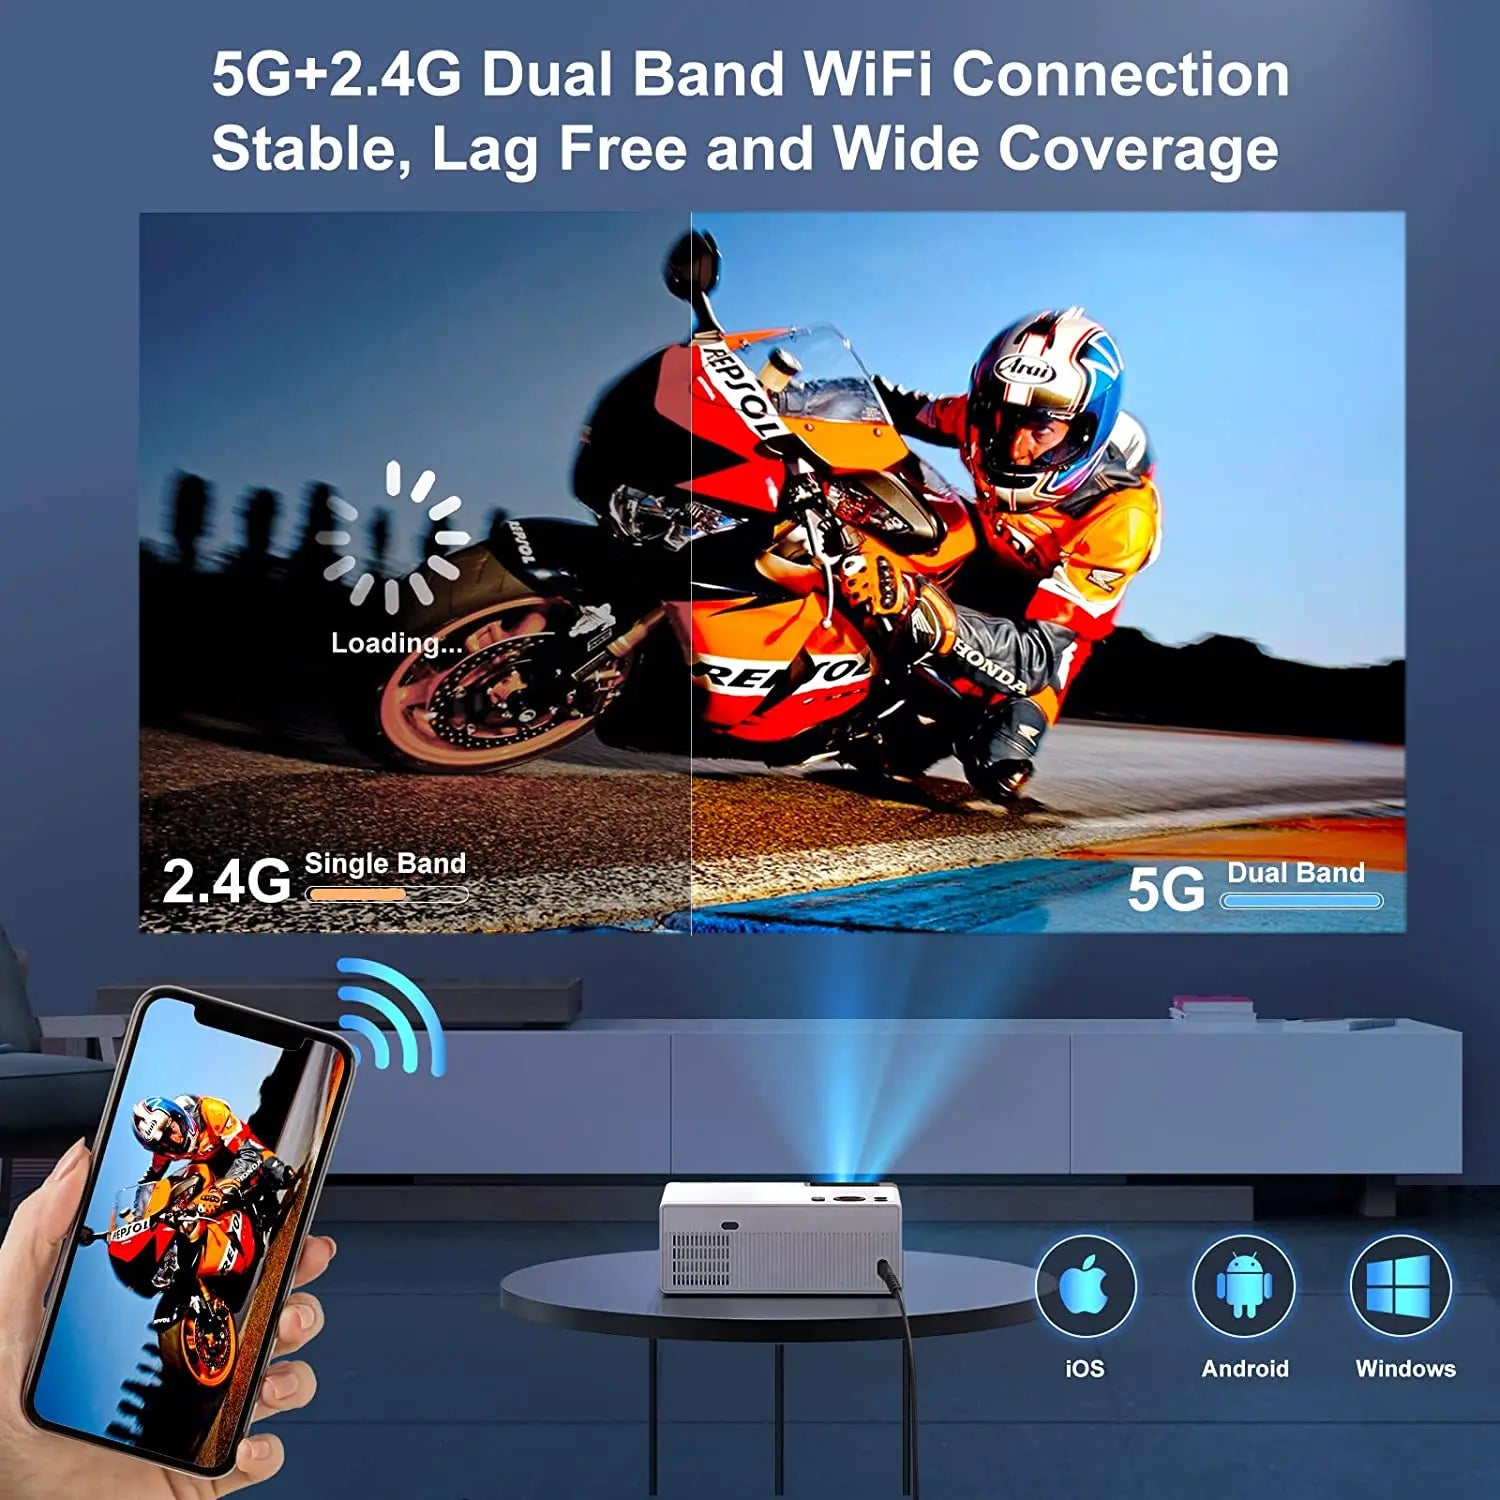 FUDONI Portable Movie Projector with WiFi and Bluetooth,5G WiFi Native